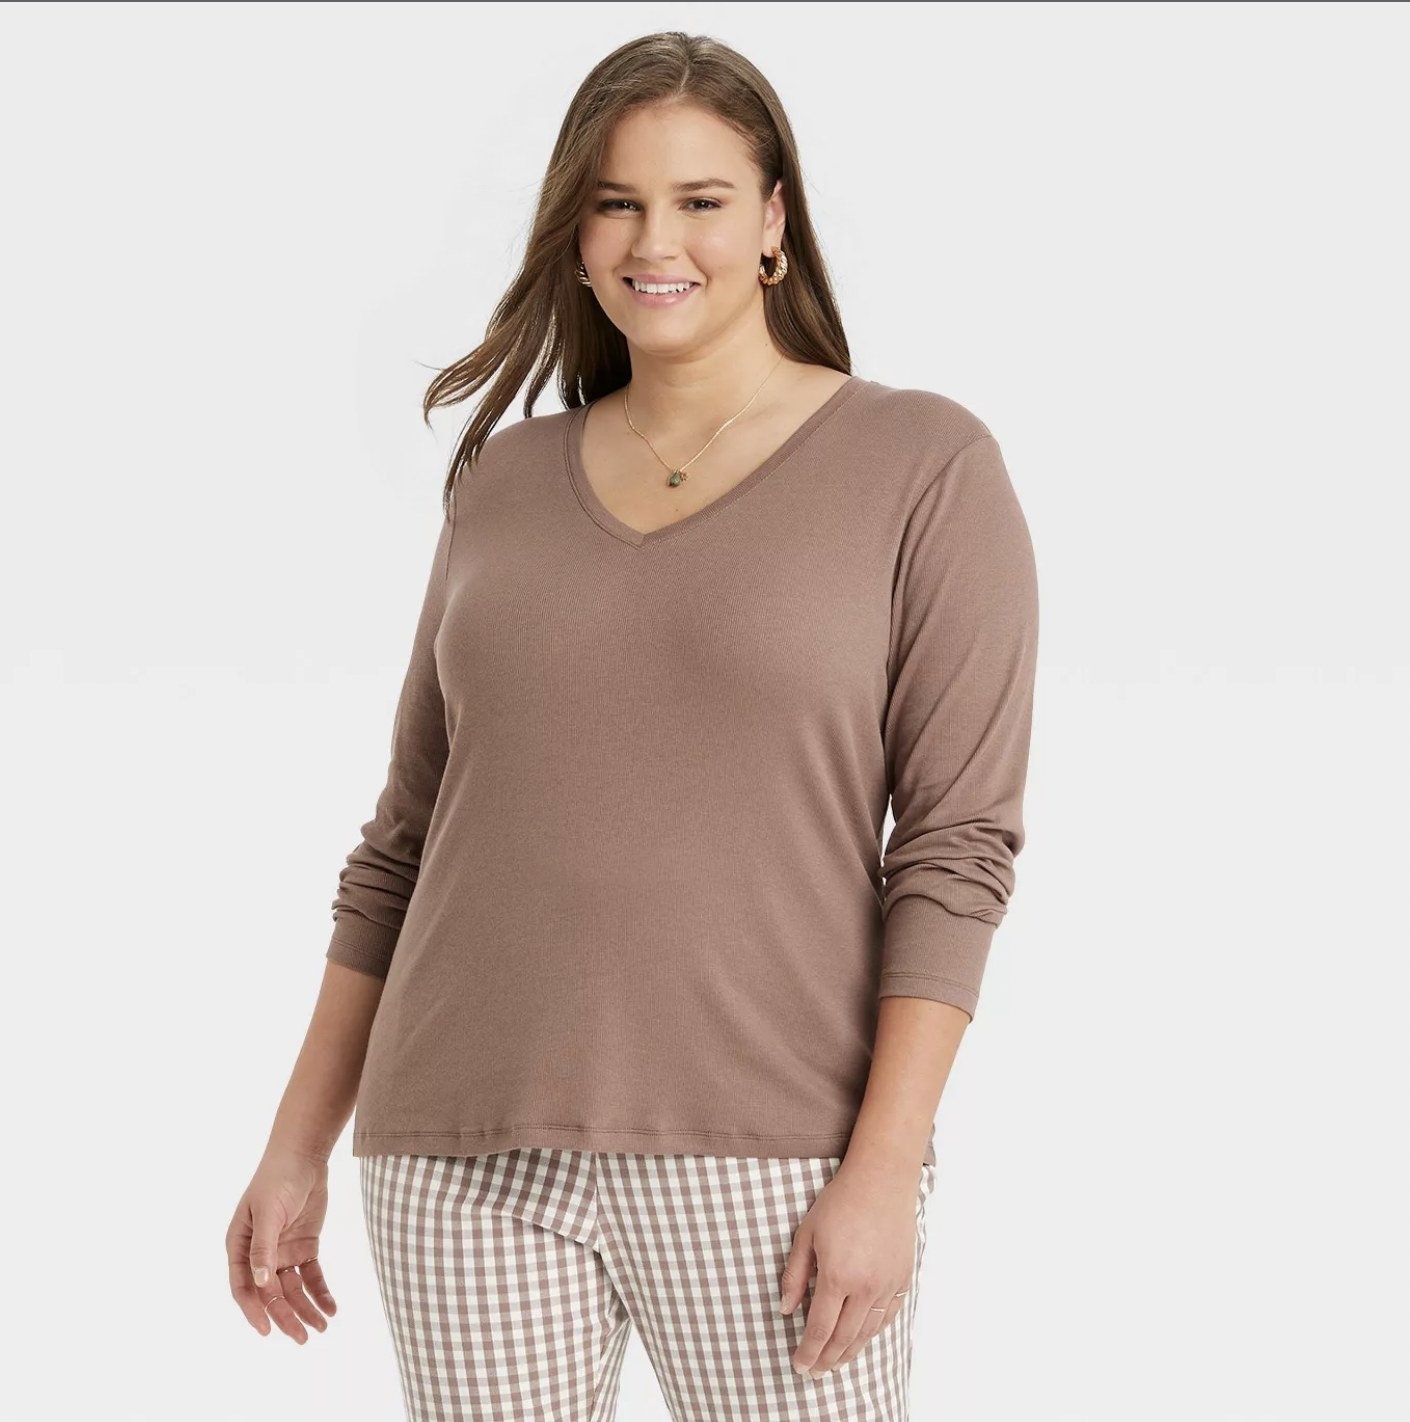 a model in a V-neck long sleeve tan top